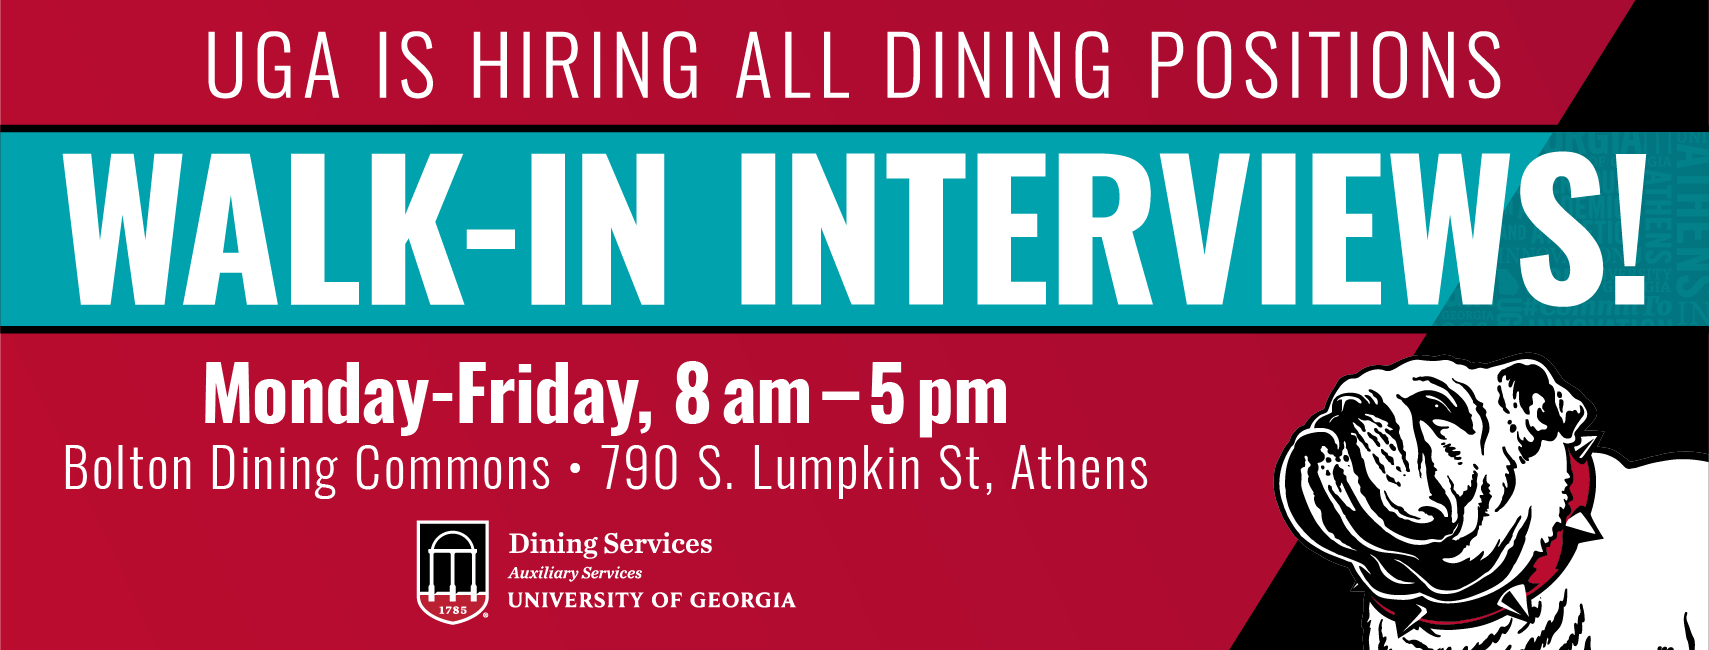 UGA is hiring all dining positions. Walk-In interviews! Monday-Friday, 8 am - 5 pm, Bolton Dining Commons, 790 S. Lumpkin St, Athens